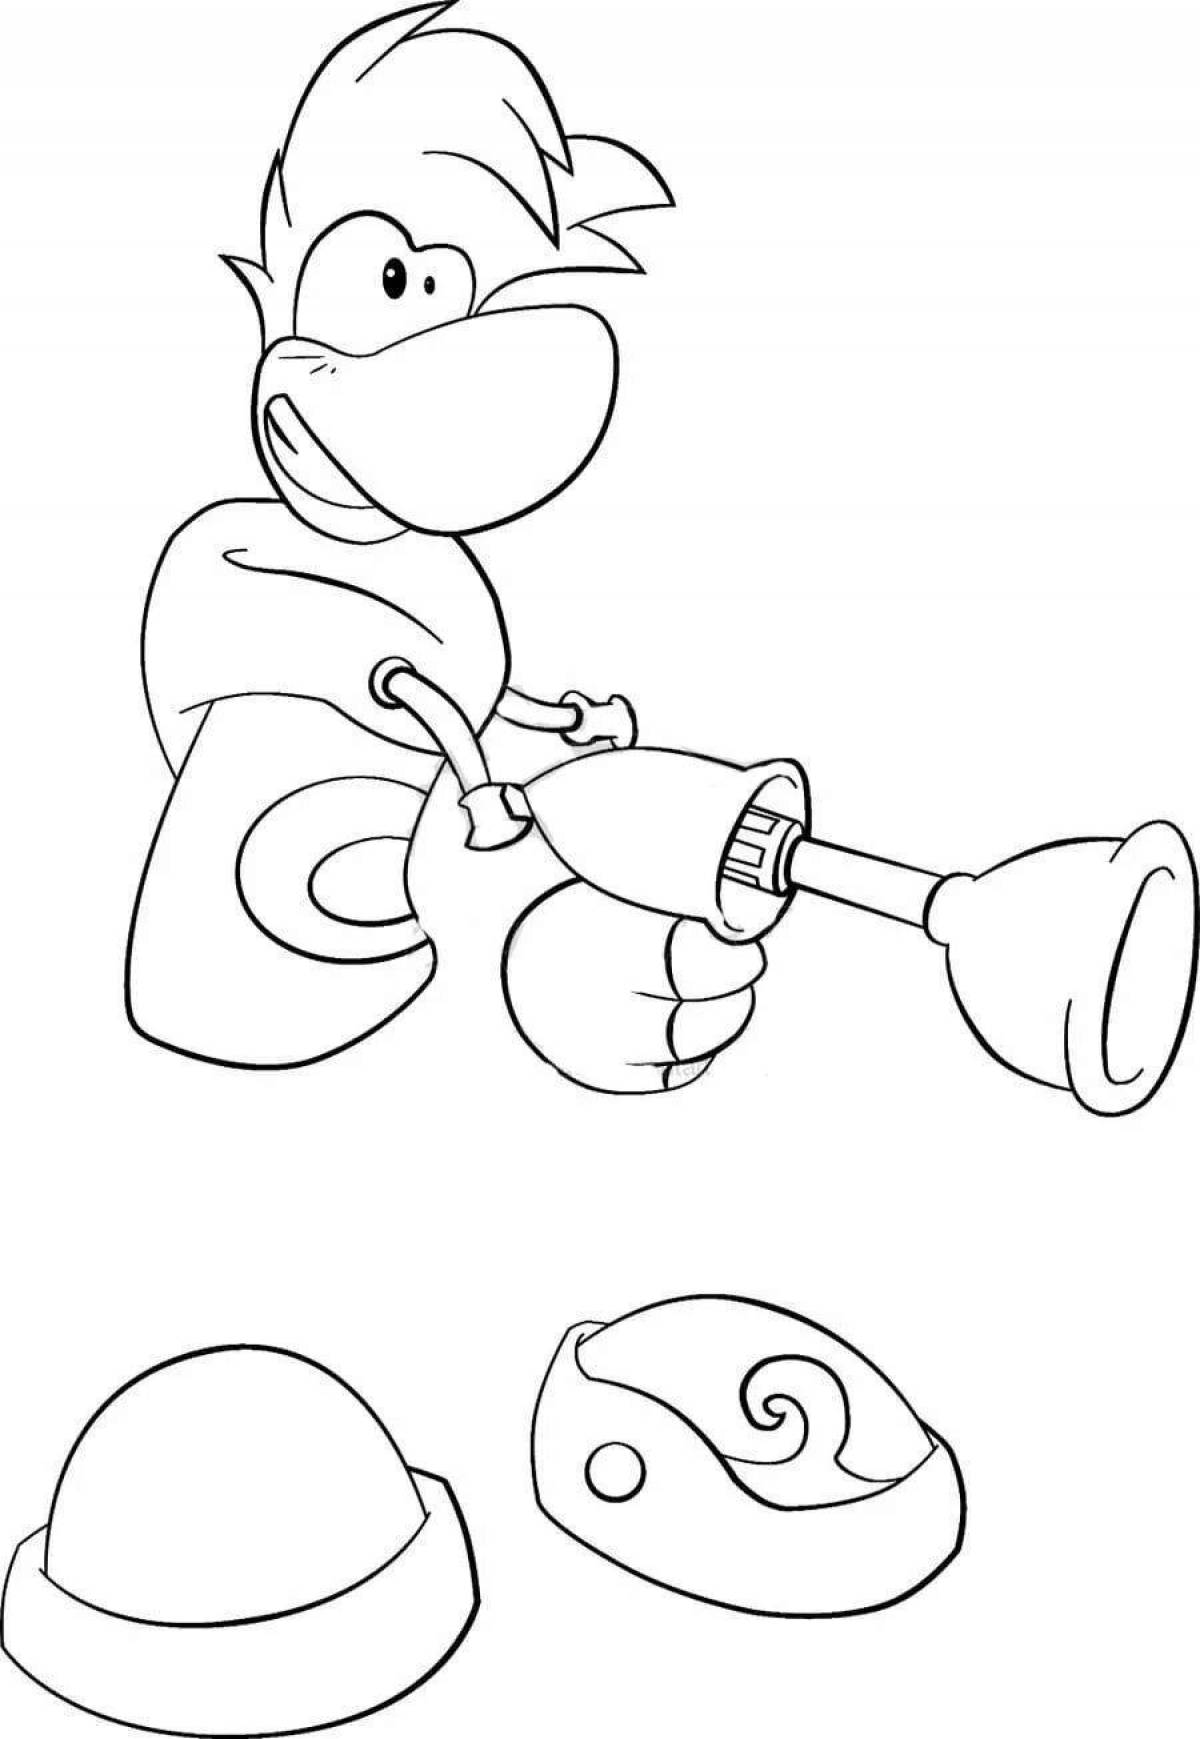 Rayman's playful coloring page